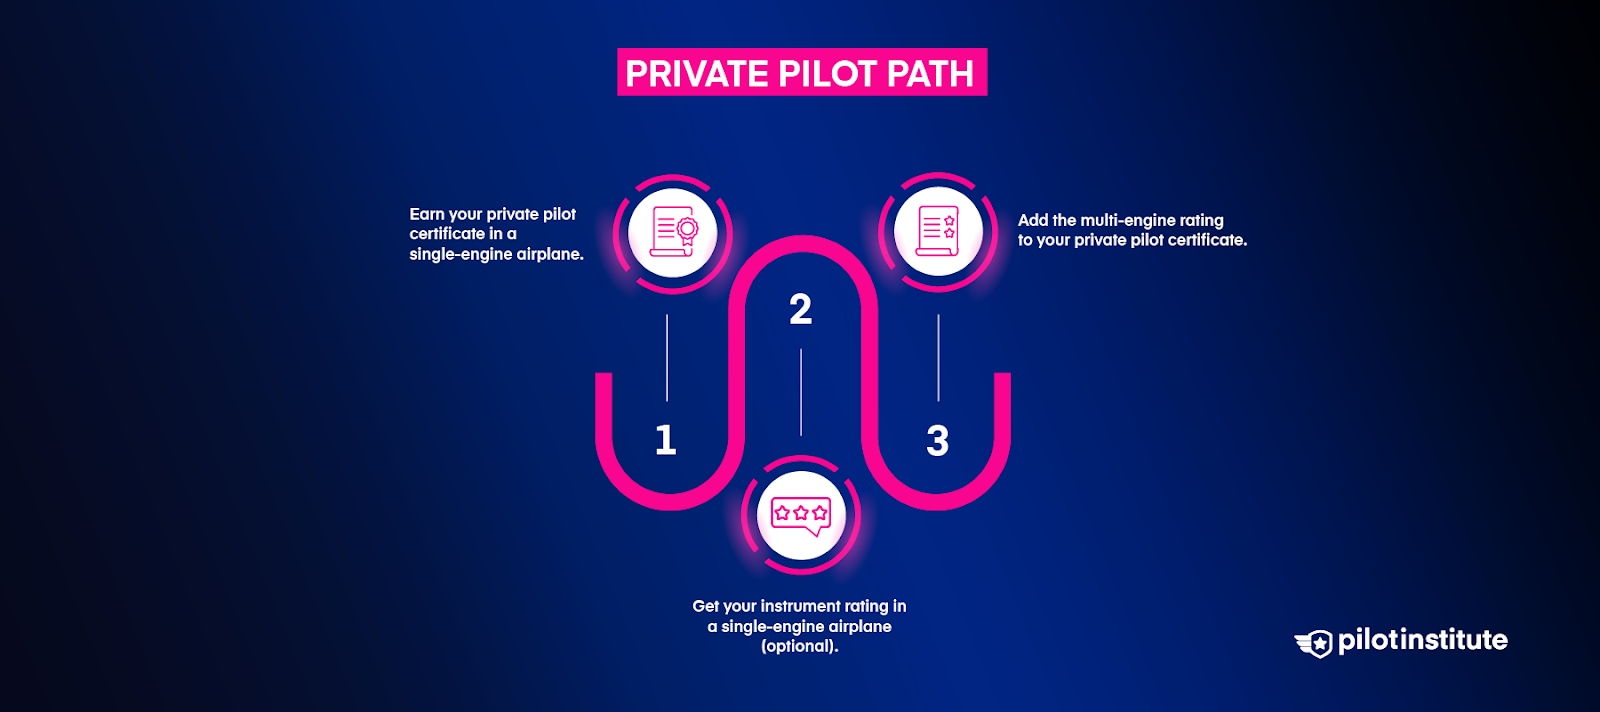 A diagram showing the path to obtaining your multi-engine rating as a private pilot.